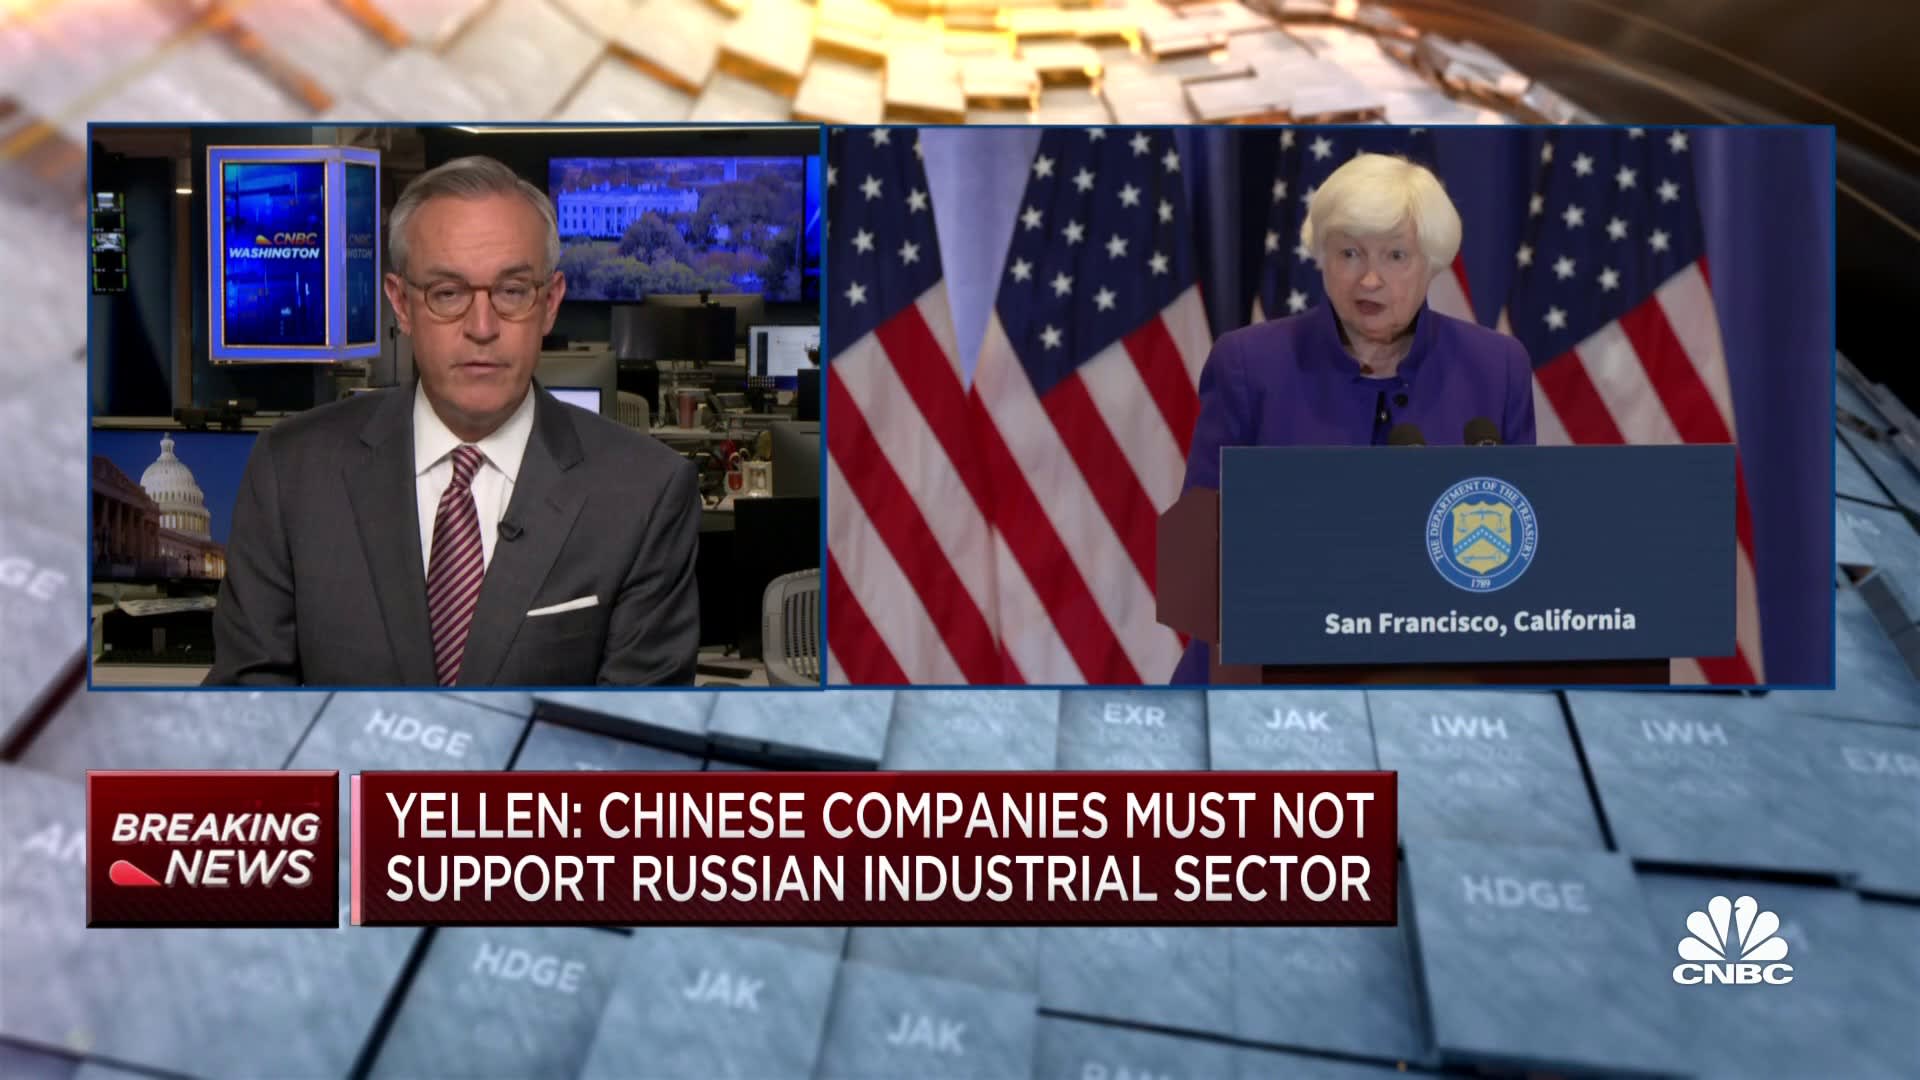 Yellen on China visit: Meeting laid a productive ground work